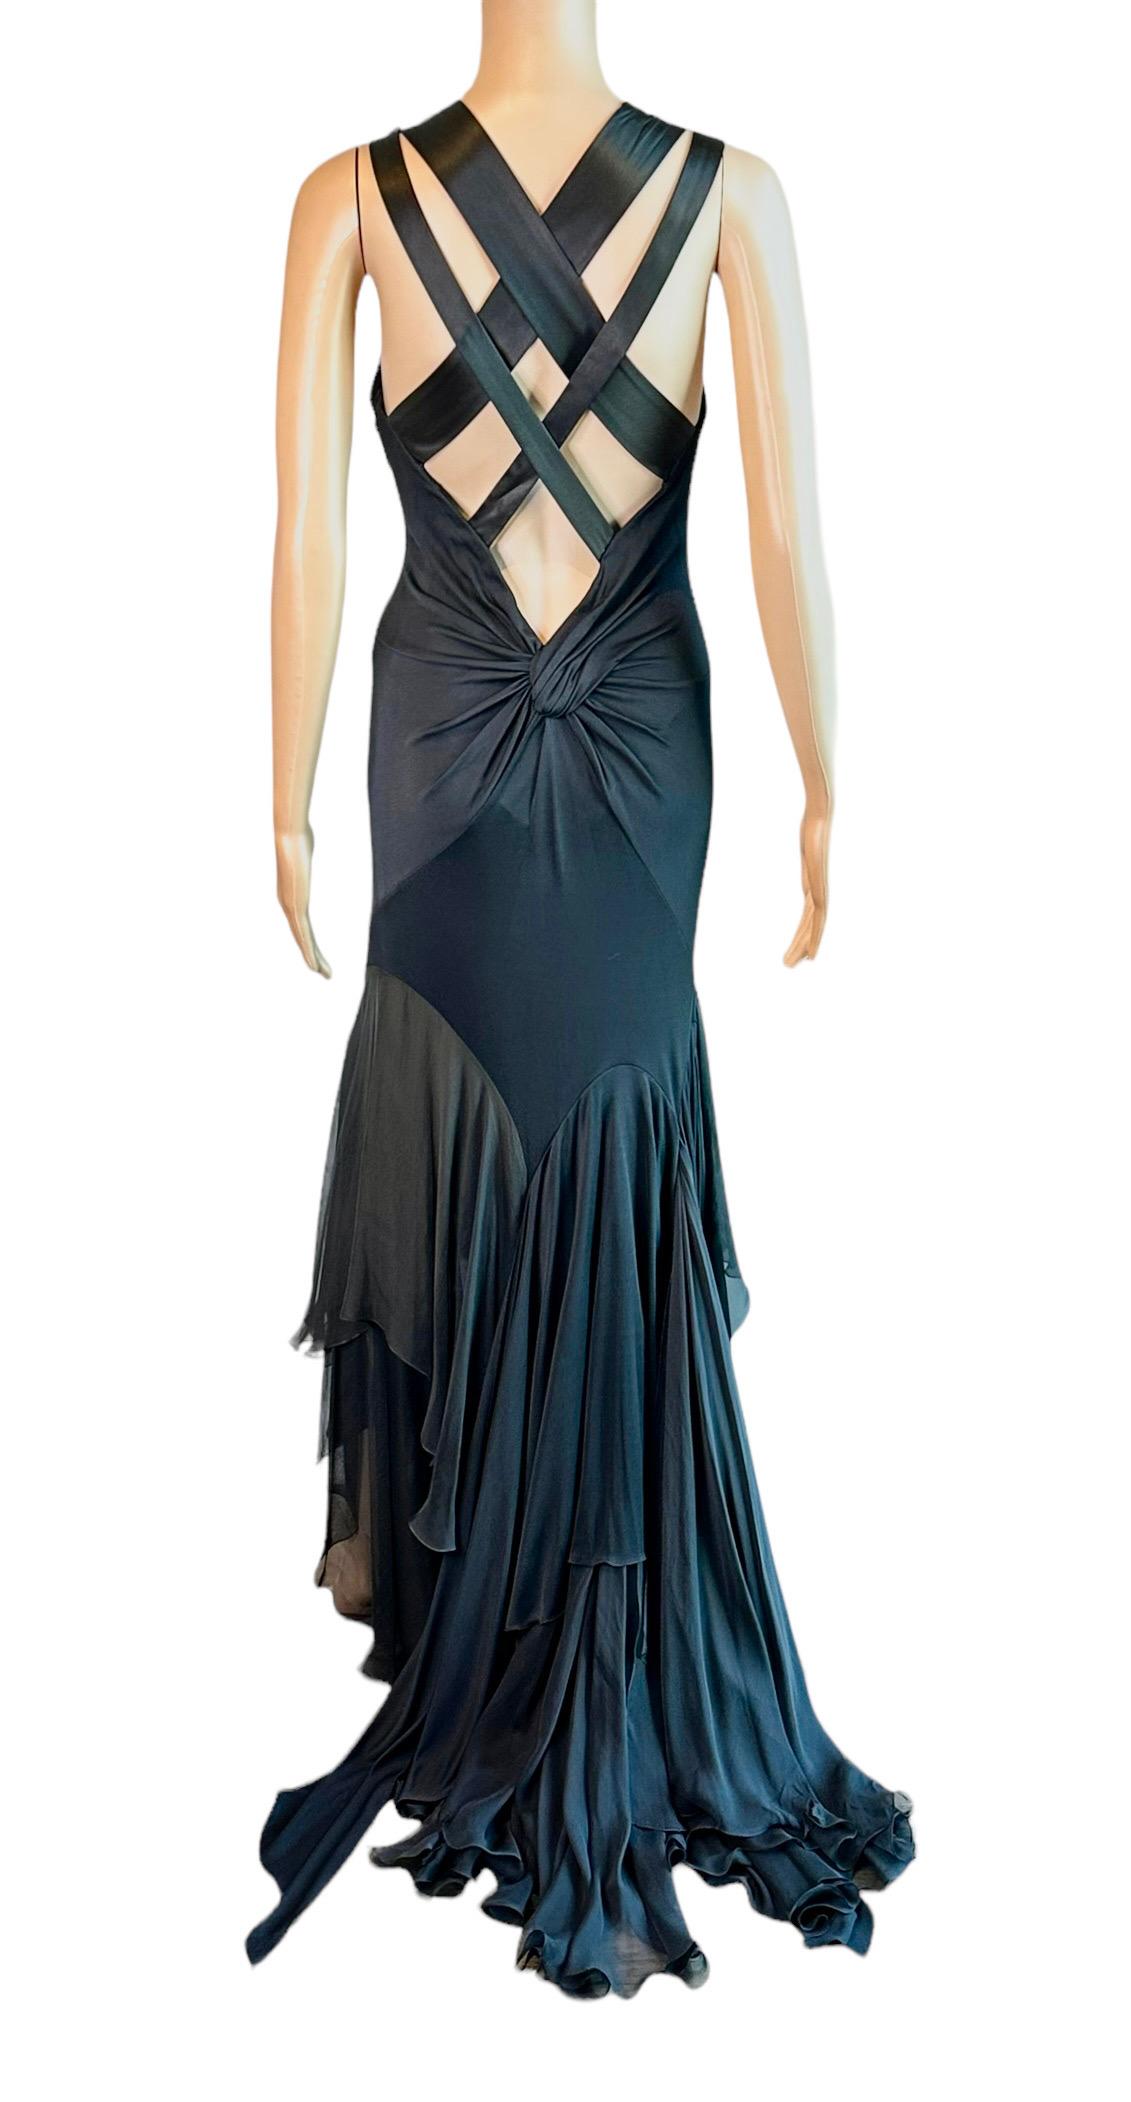 Versace S/S 2004 Plunged Halter Open Back Ruffles Black Evening Dress Gown  In Good Condition For Sale In Naples, FL